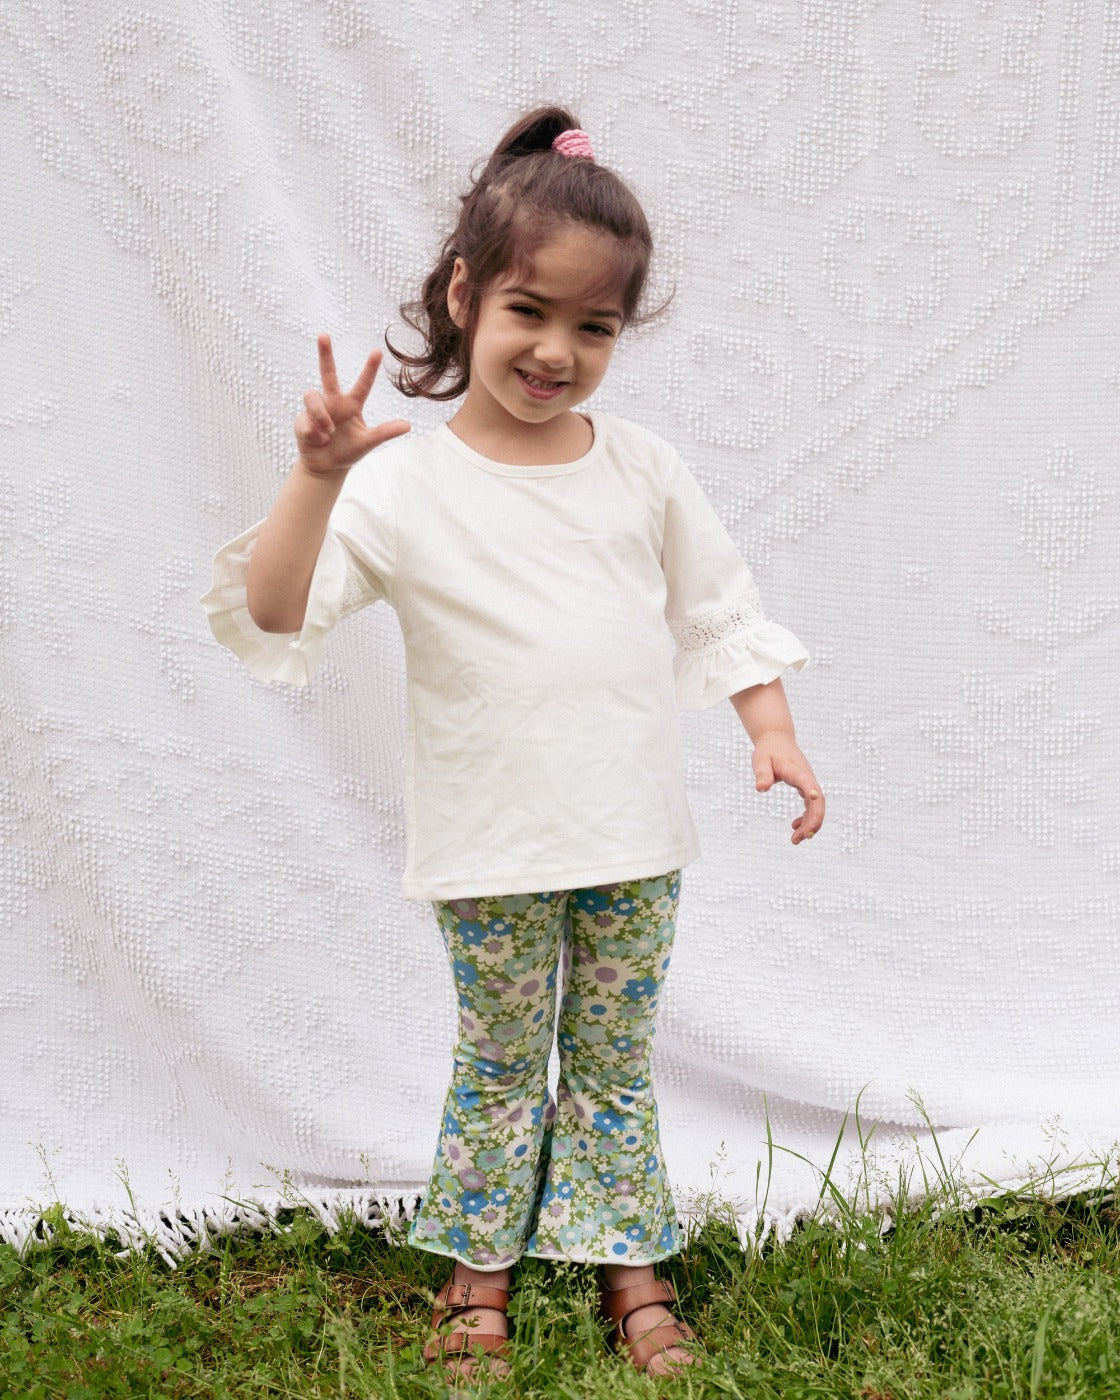 Green And Blue Flower Power Jersey Knit Bell Bottoms For Babies, Toddlers And Girls